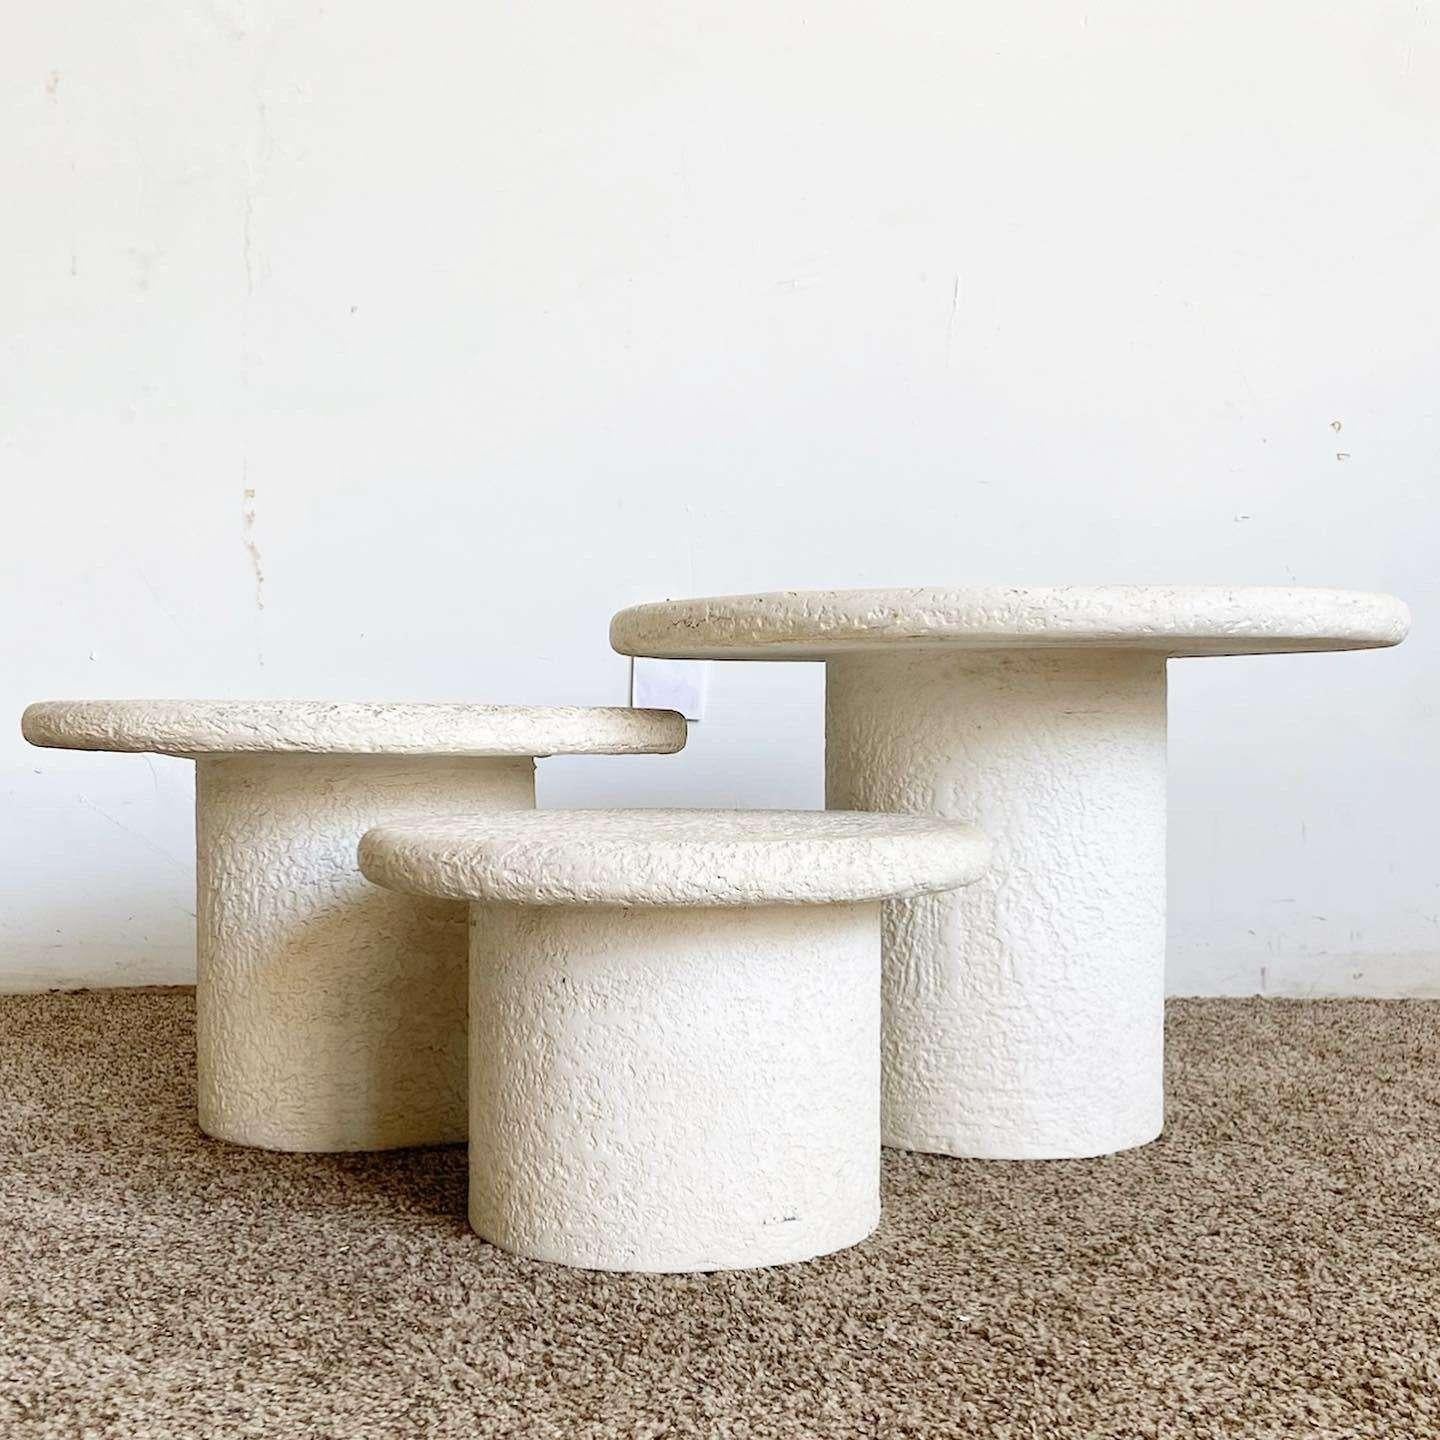 Incredible set of 3 vintage postmodern mushroom nesting side tables. Each a textured “stucco” off white finish.

Small table measures 16”W, 10.5”H
Medium table measures 20”W, 13.5”H